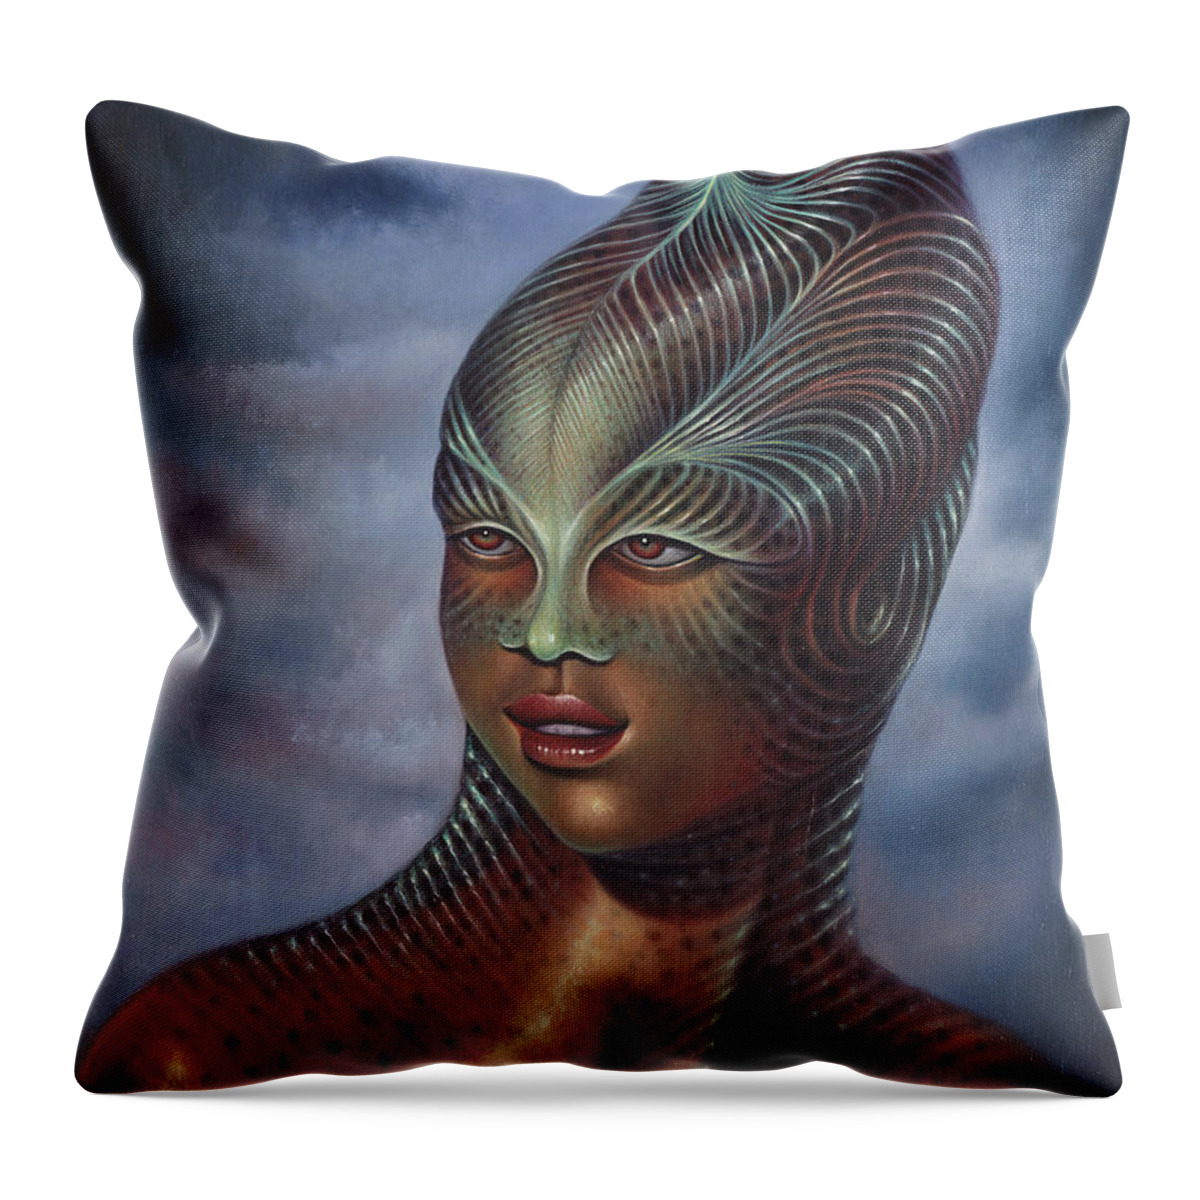 Sci-fi Throw Pillow featuring the painting Alien Portrait I by Ricardo Chavez-Mendez